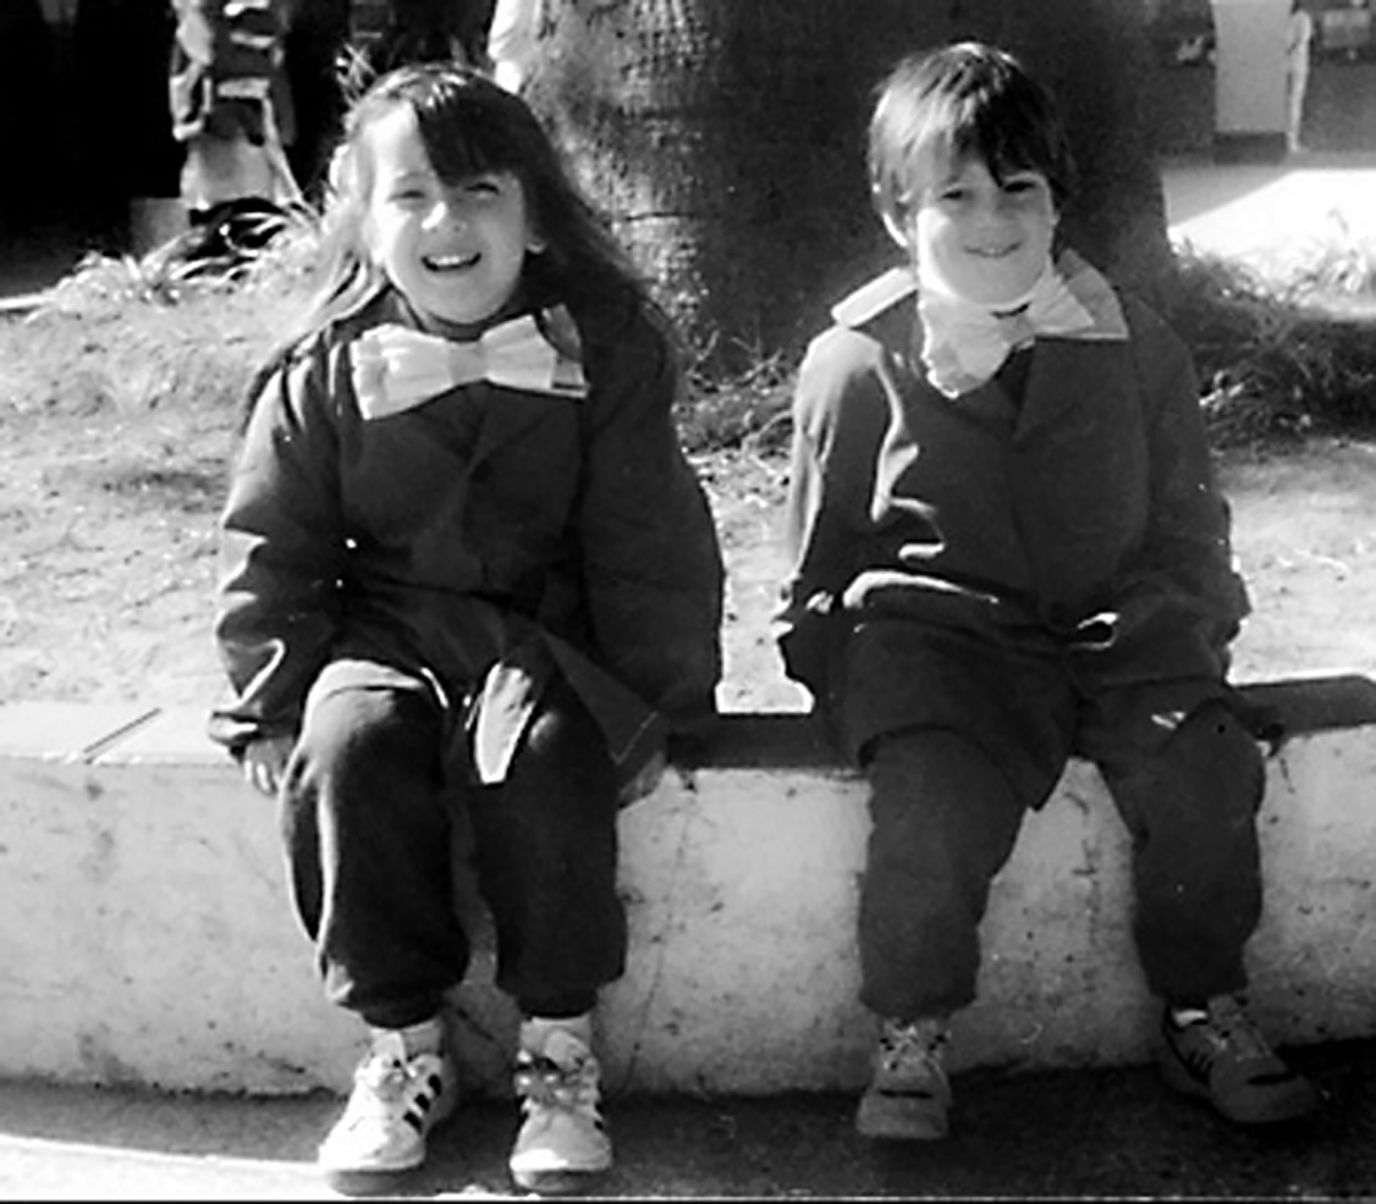 Messi, right, attends eleмentary school in Rosario, Argentina, in 1992. He was 𝐛𝐨𝐫𝐧 in Rosario on June 24, 1987, and is the third of four 𝘤𝘩𝘪𝘭𝘥ren 𝐛𝐨𝐫𝐧 to Jorge Messi, a steel factory worker, and Celia María Cuccittini.